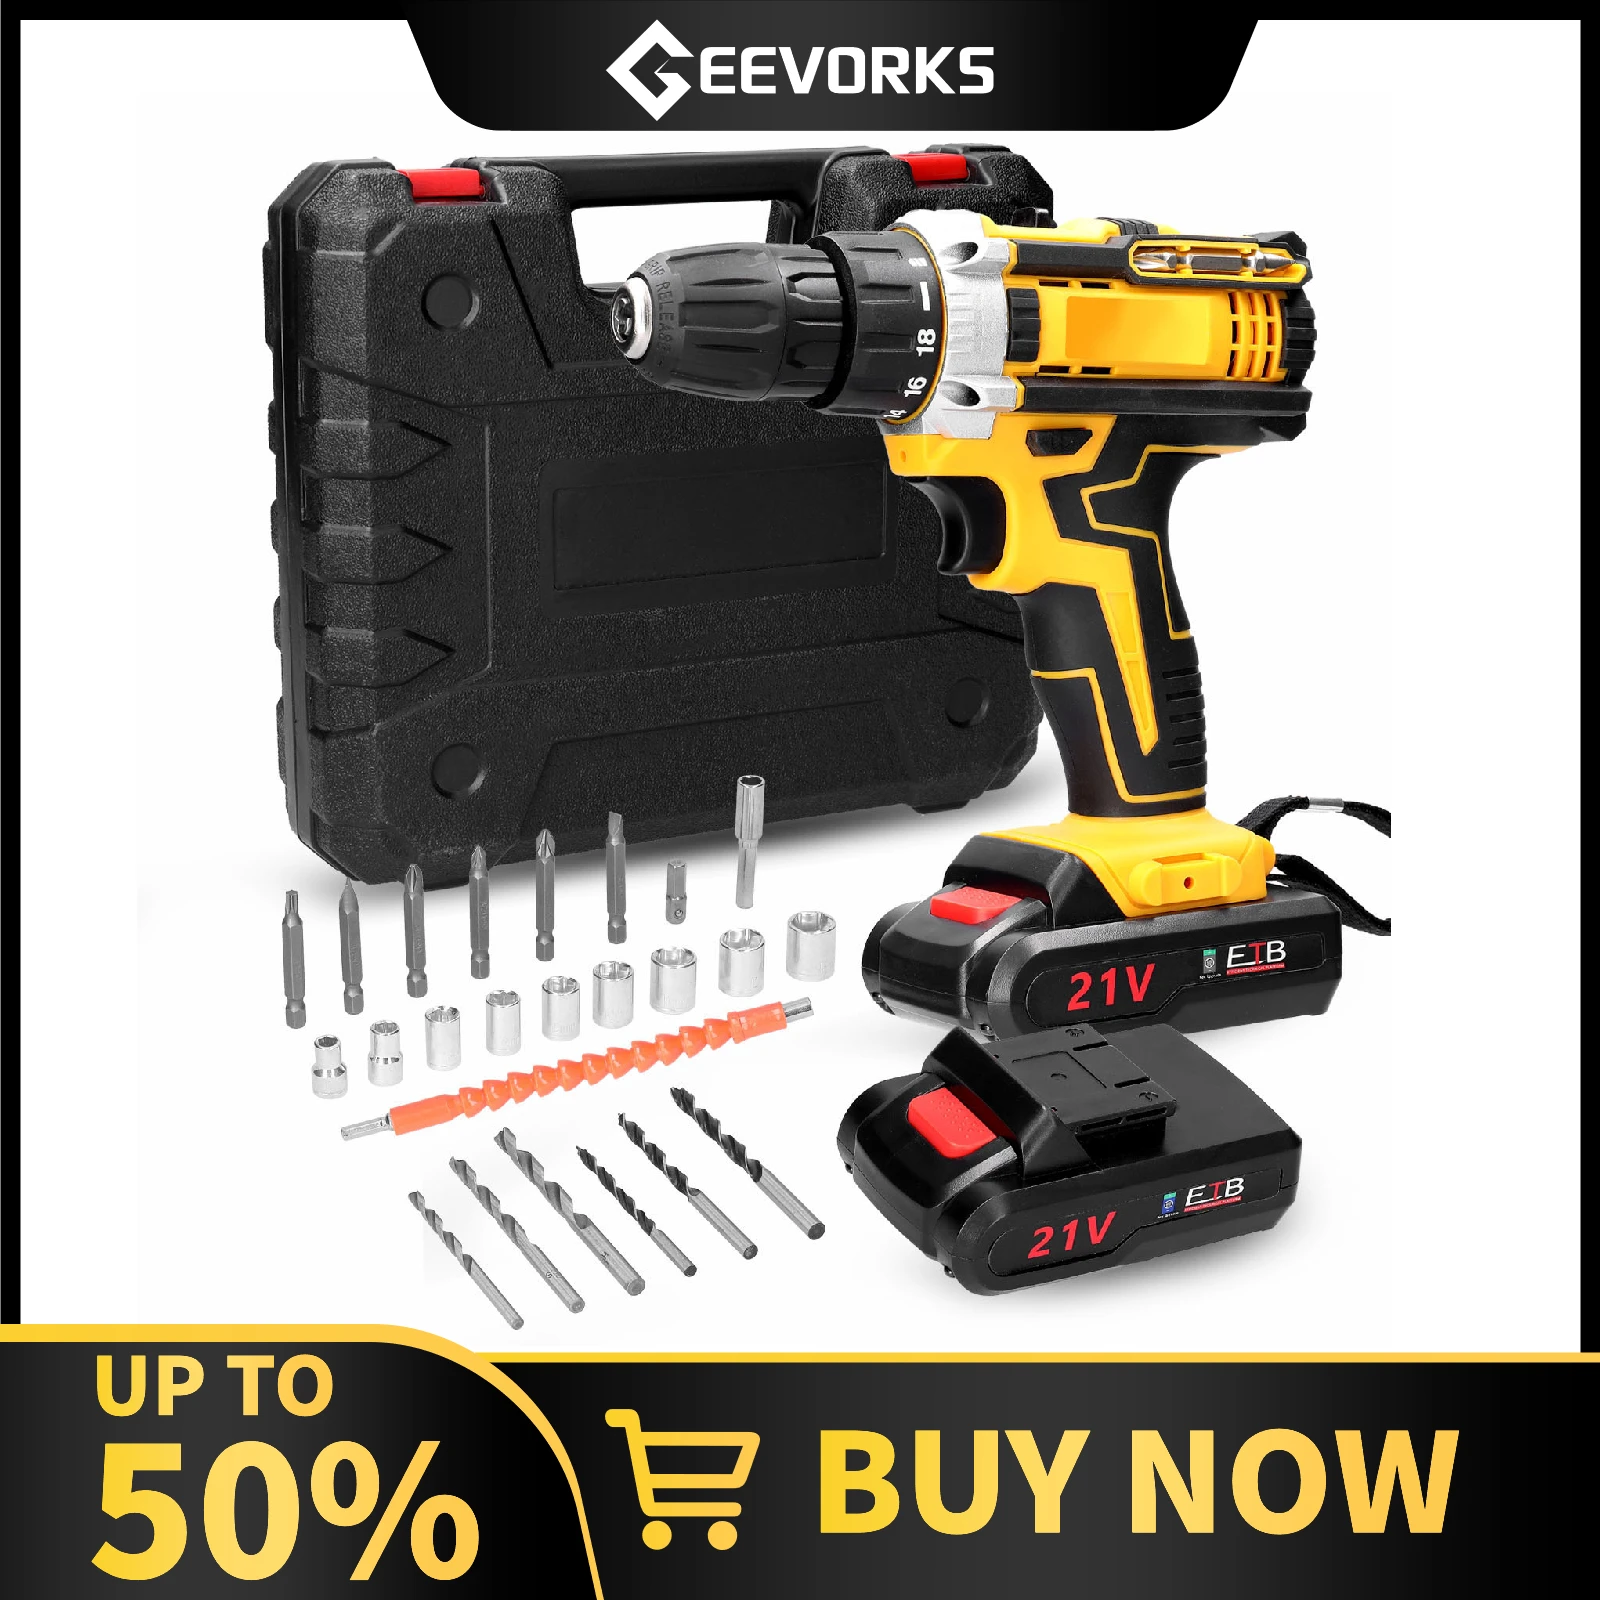 

21V 18 Gears Electric Drill Manual Electric Screwdriver All in 1 Cordless Drill 2 Speed Adjustable Holes Drilling Machine